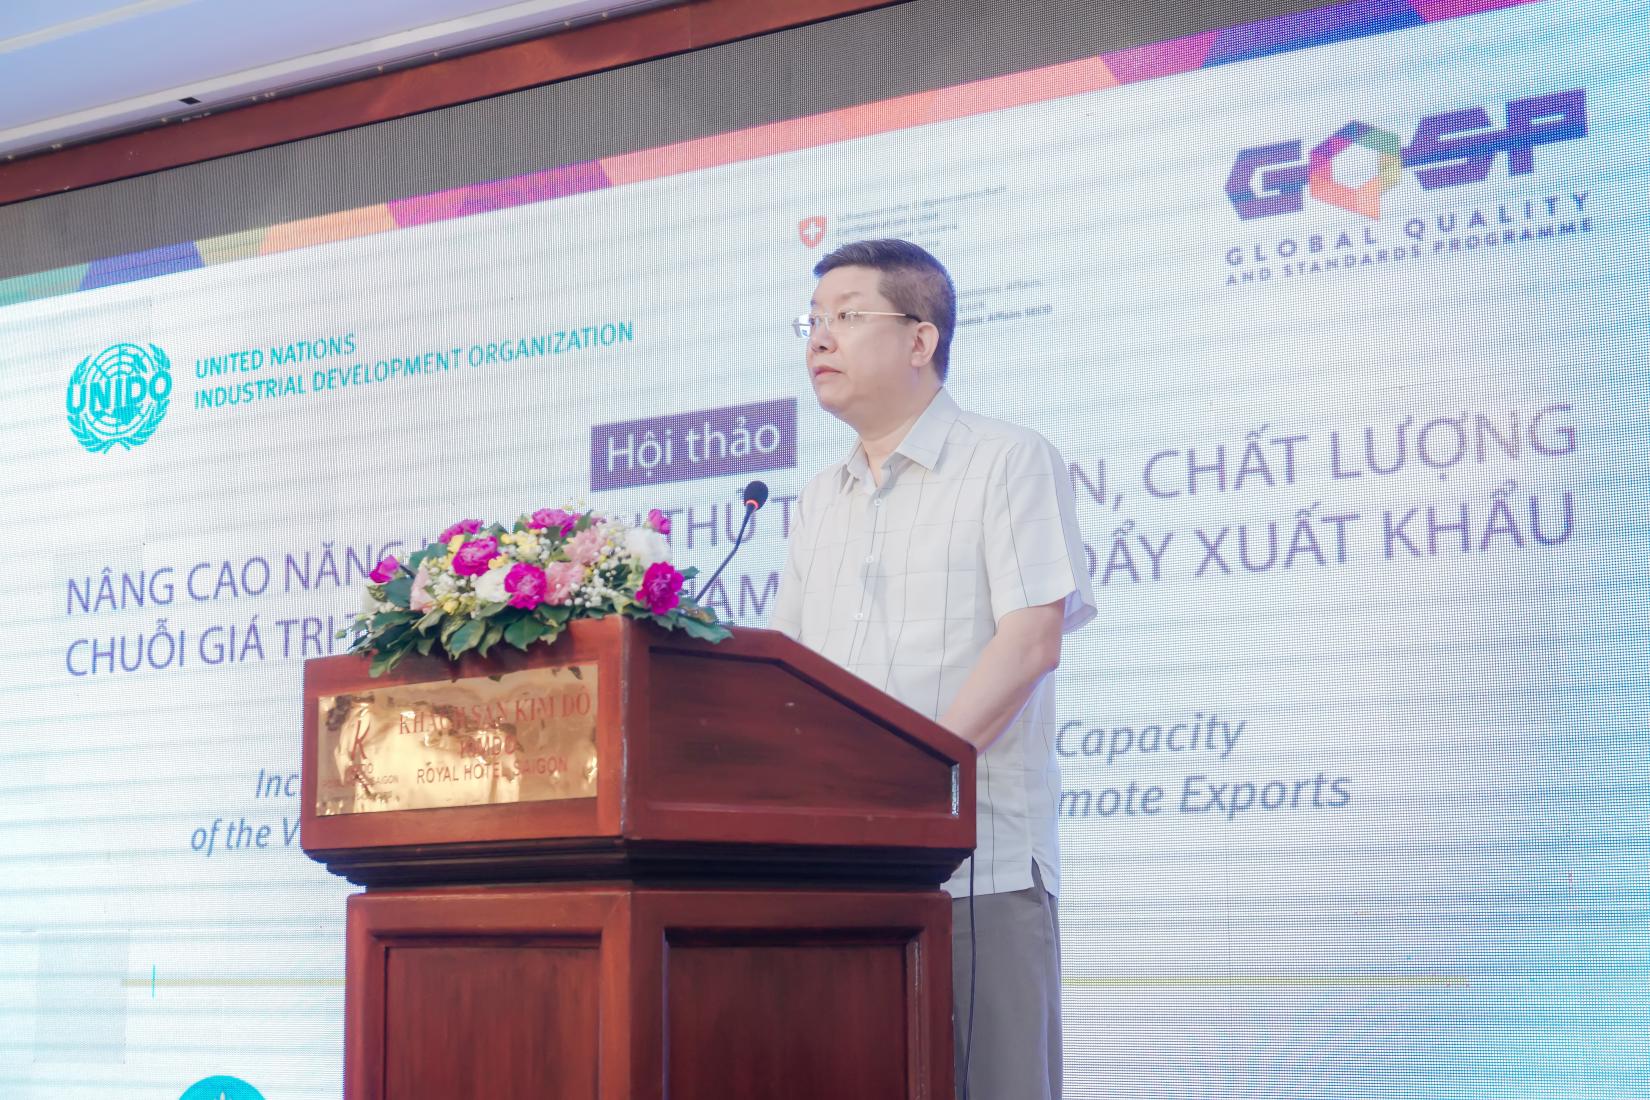 Mr. Le Thanh Hoa, Deputy Director of National Agro-Forestry-Fishery Quality, Processing and Market Development Authority, Ministry of Agriculture and Rural Development